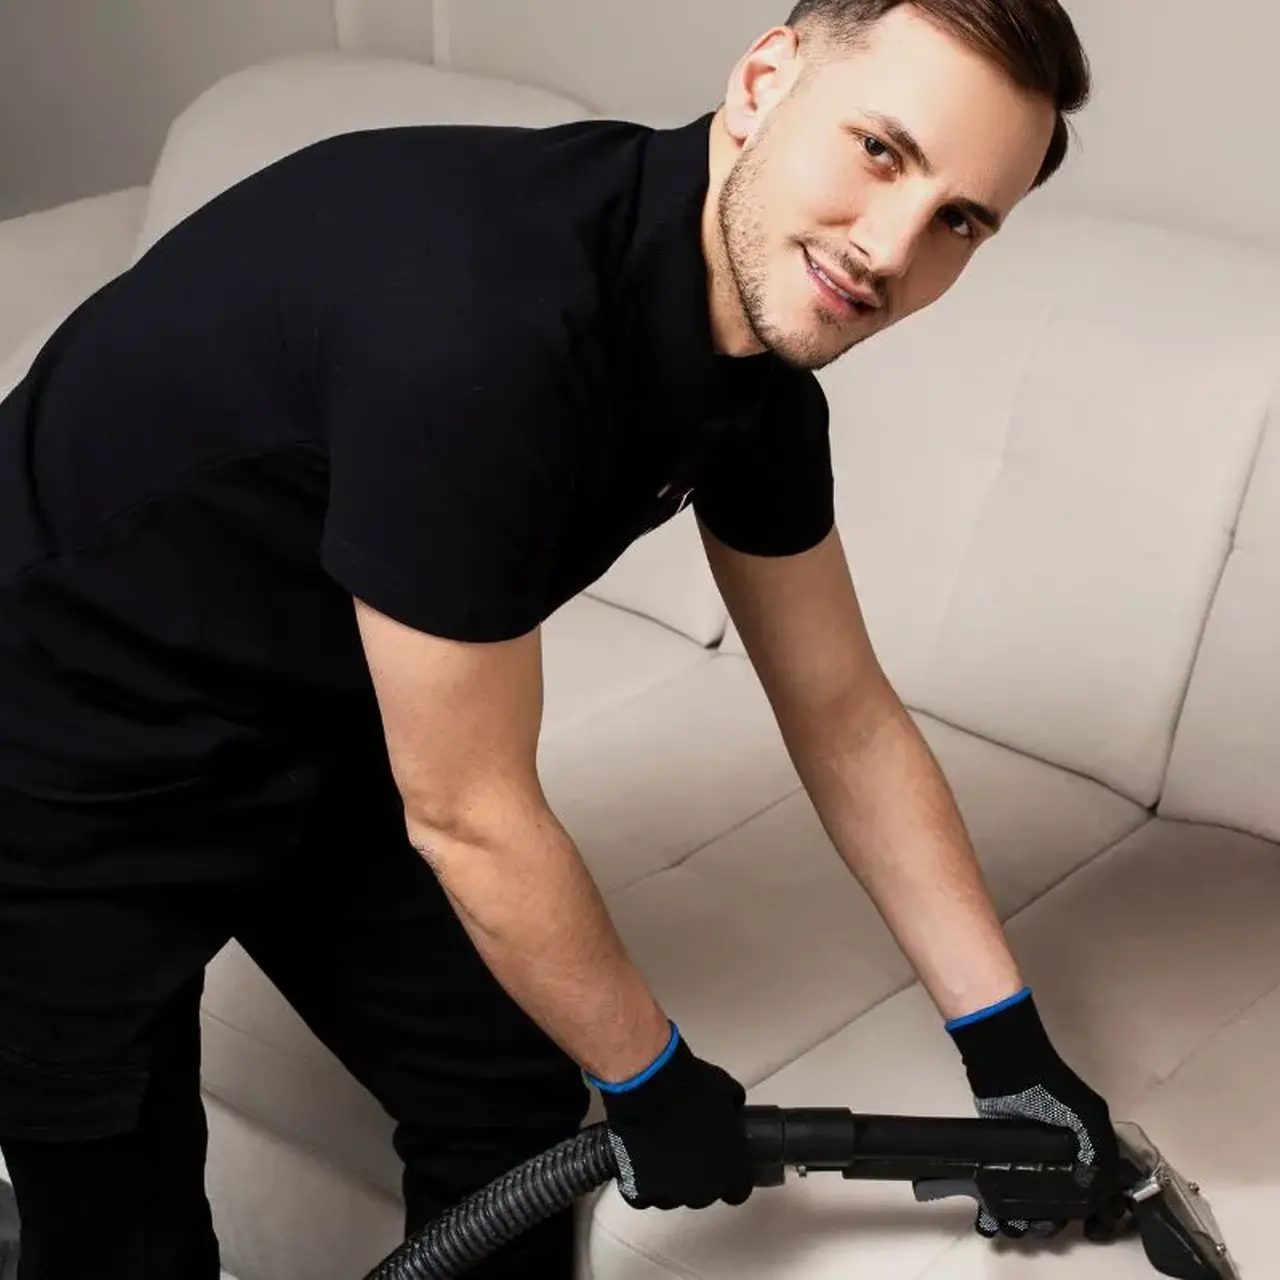 Deeo Stean Sofa cleaning technician Chiswick